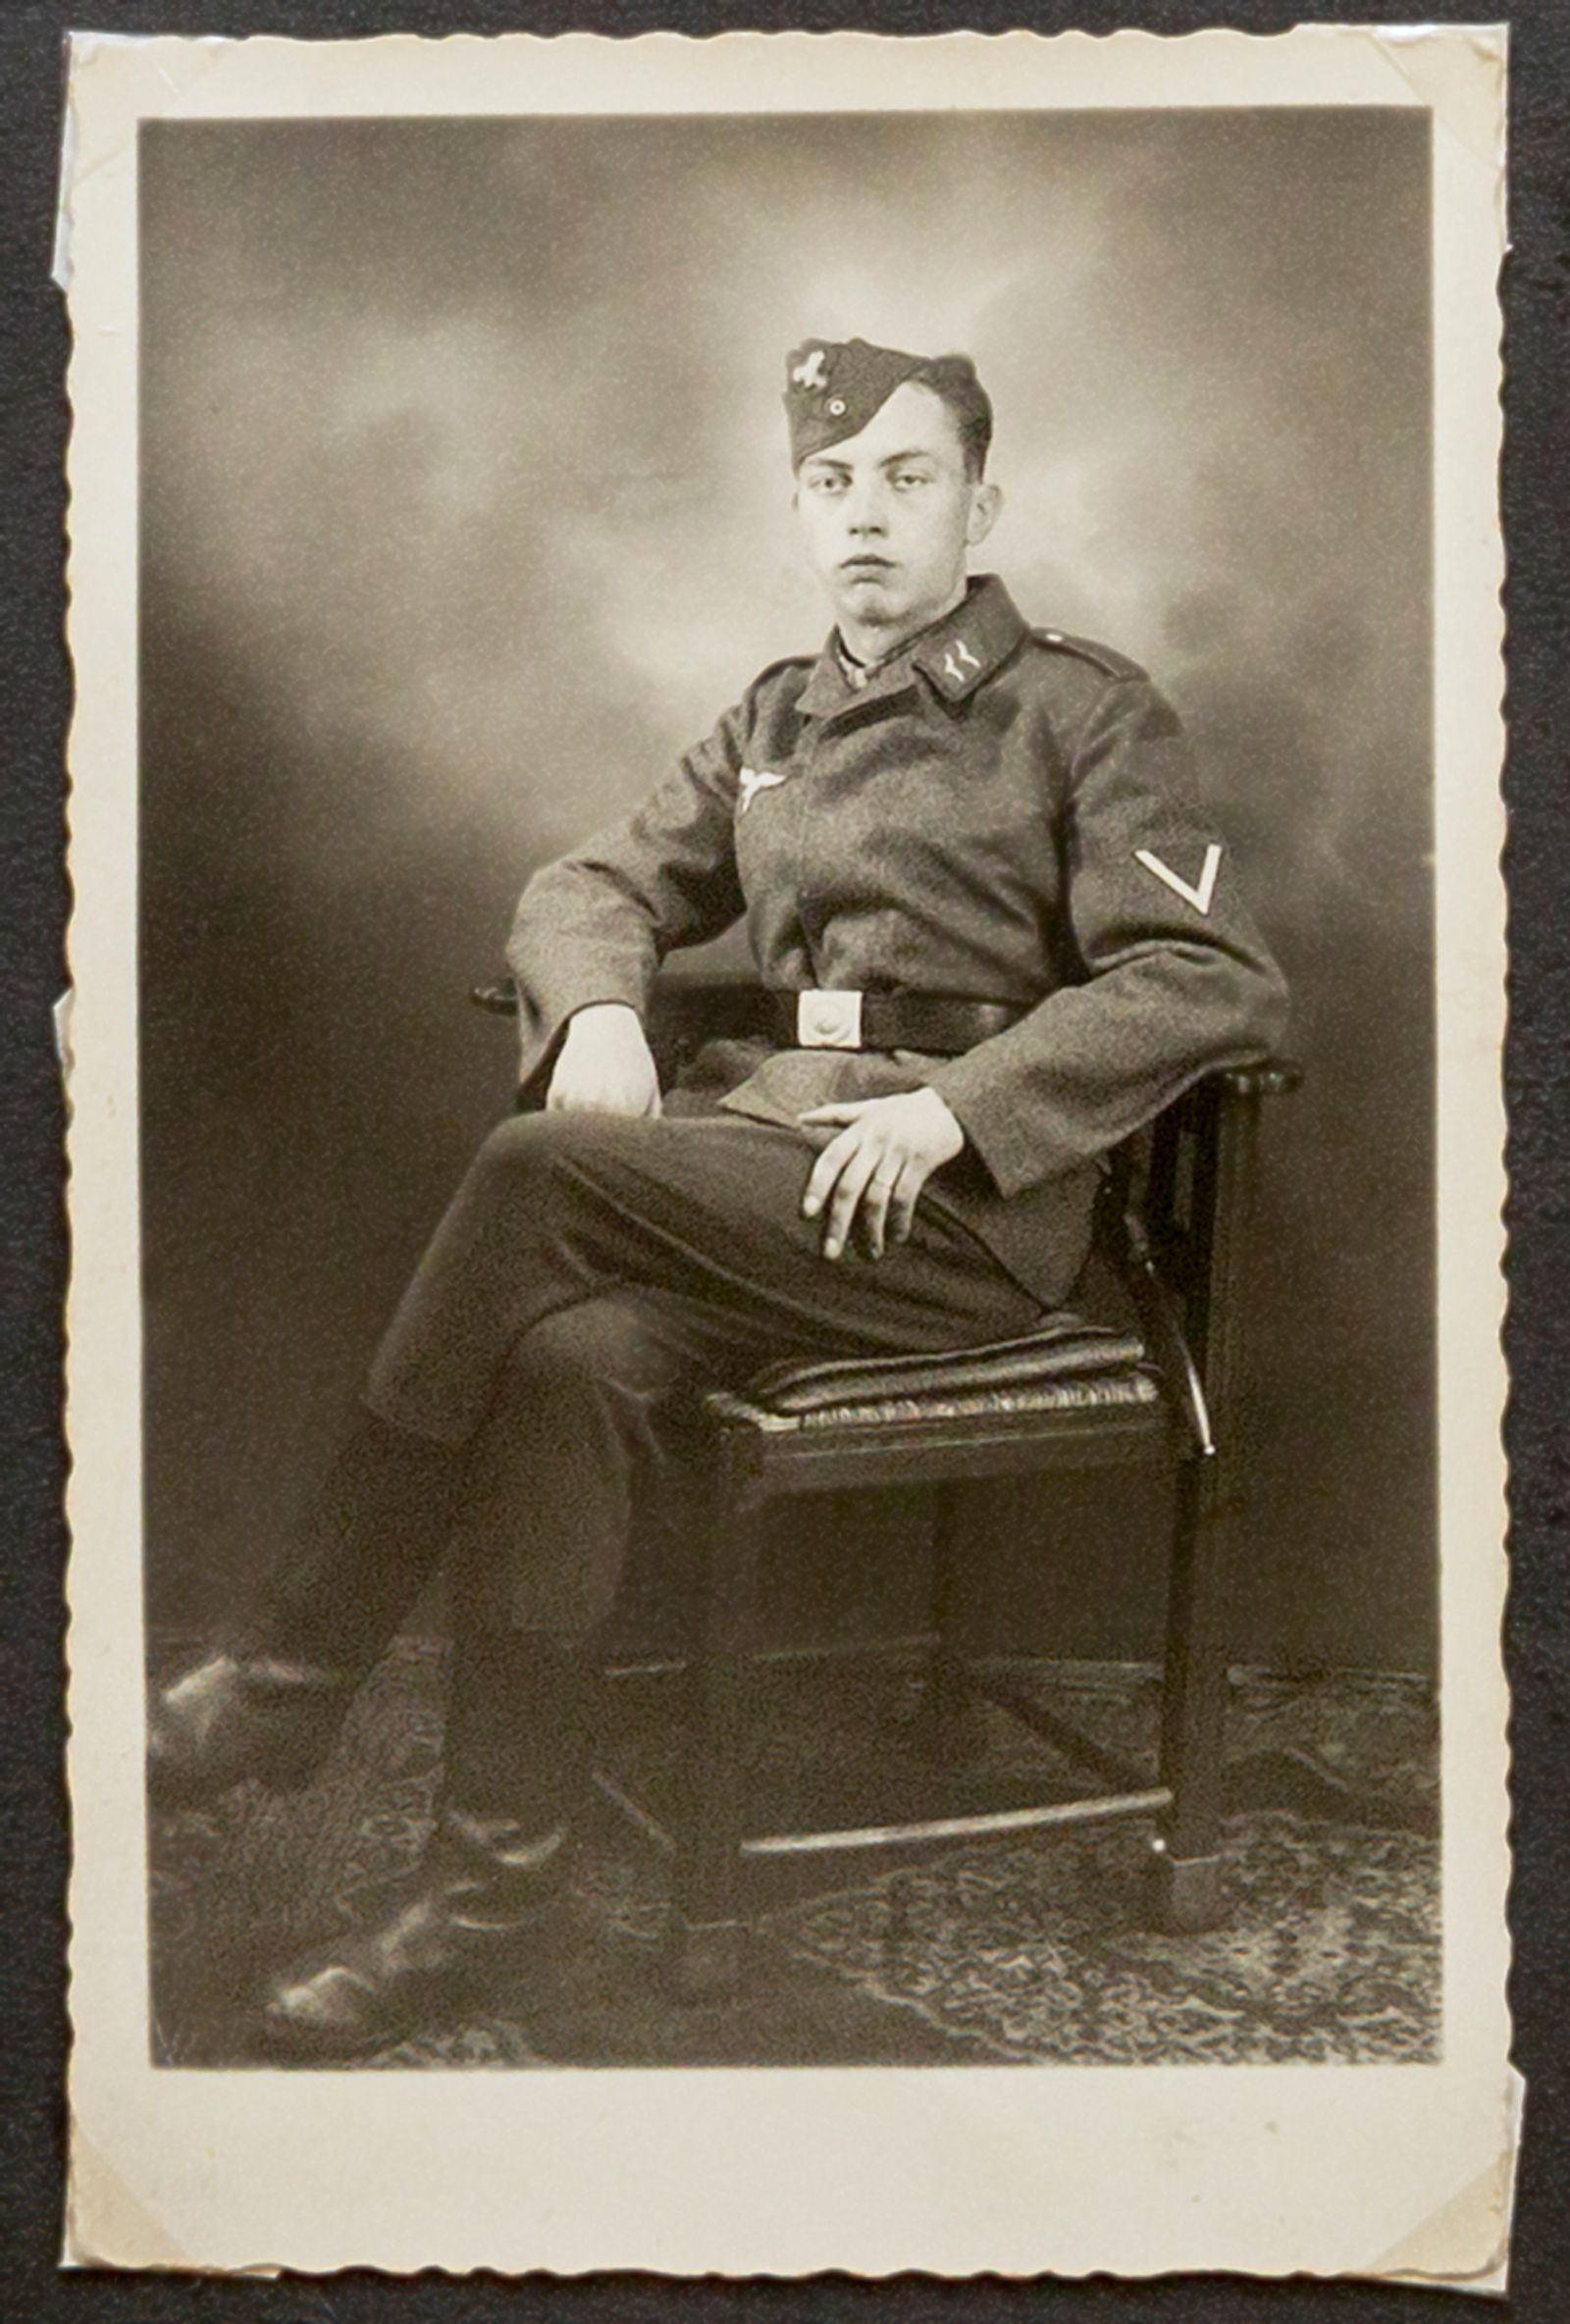 © Angeniet Berkers - Paul-Erik’s father at the age of 21 in his Luftwaffe uniform.